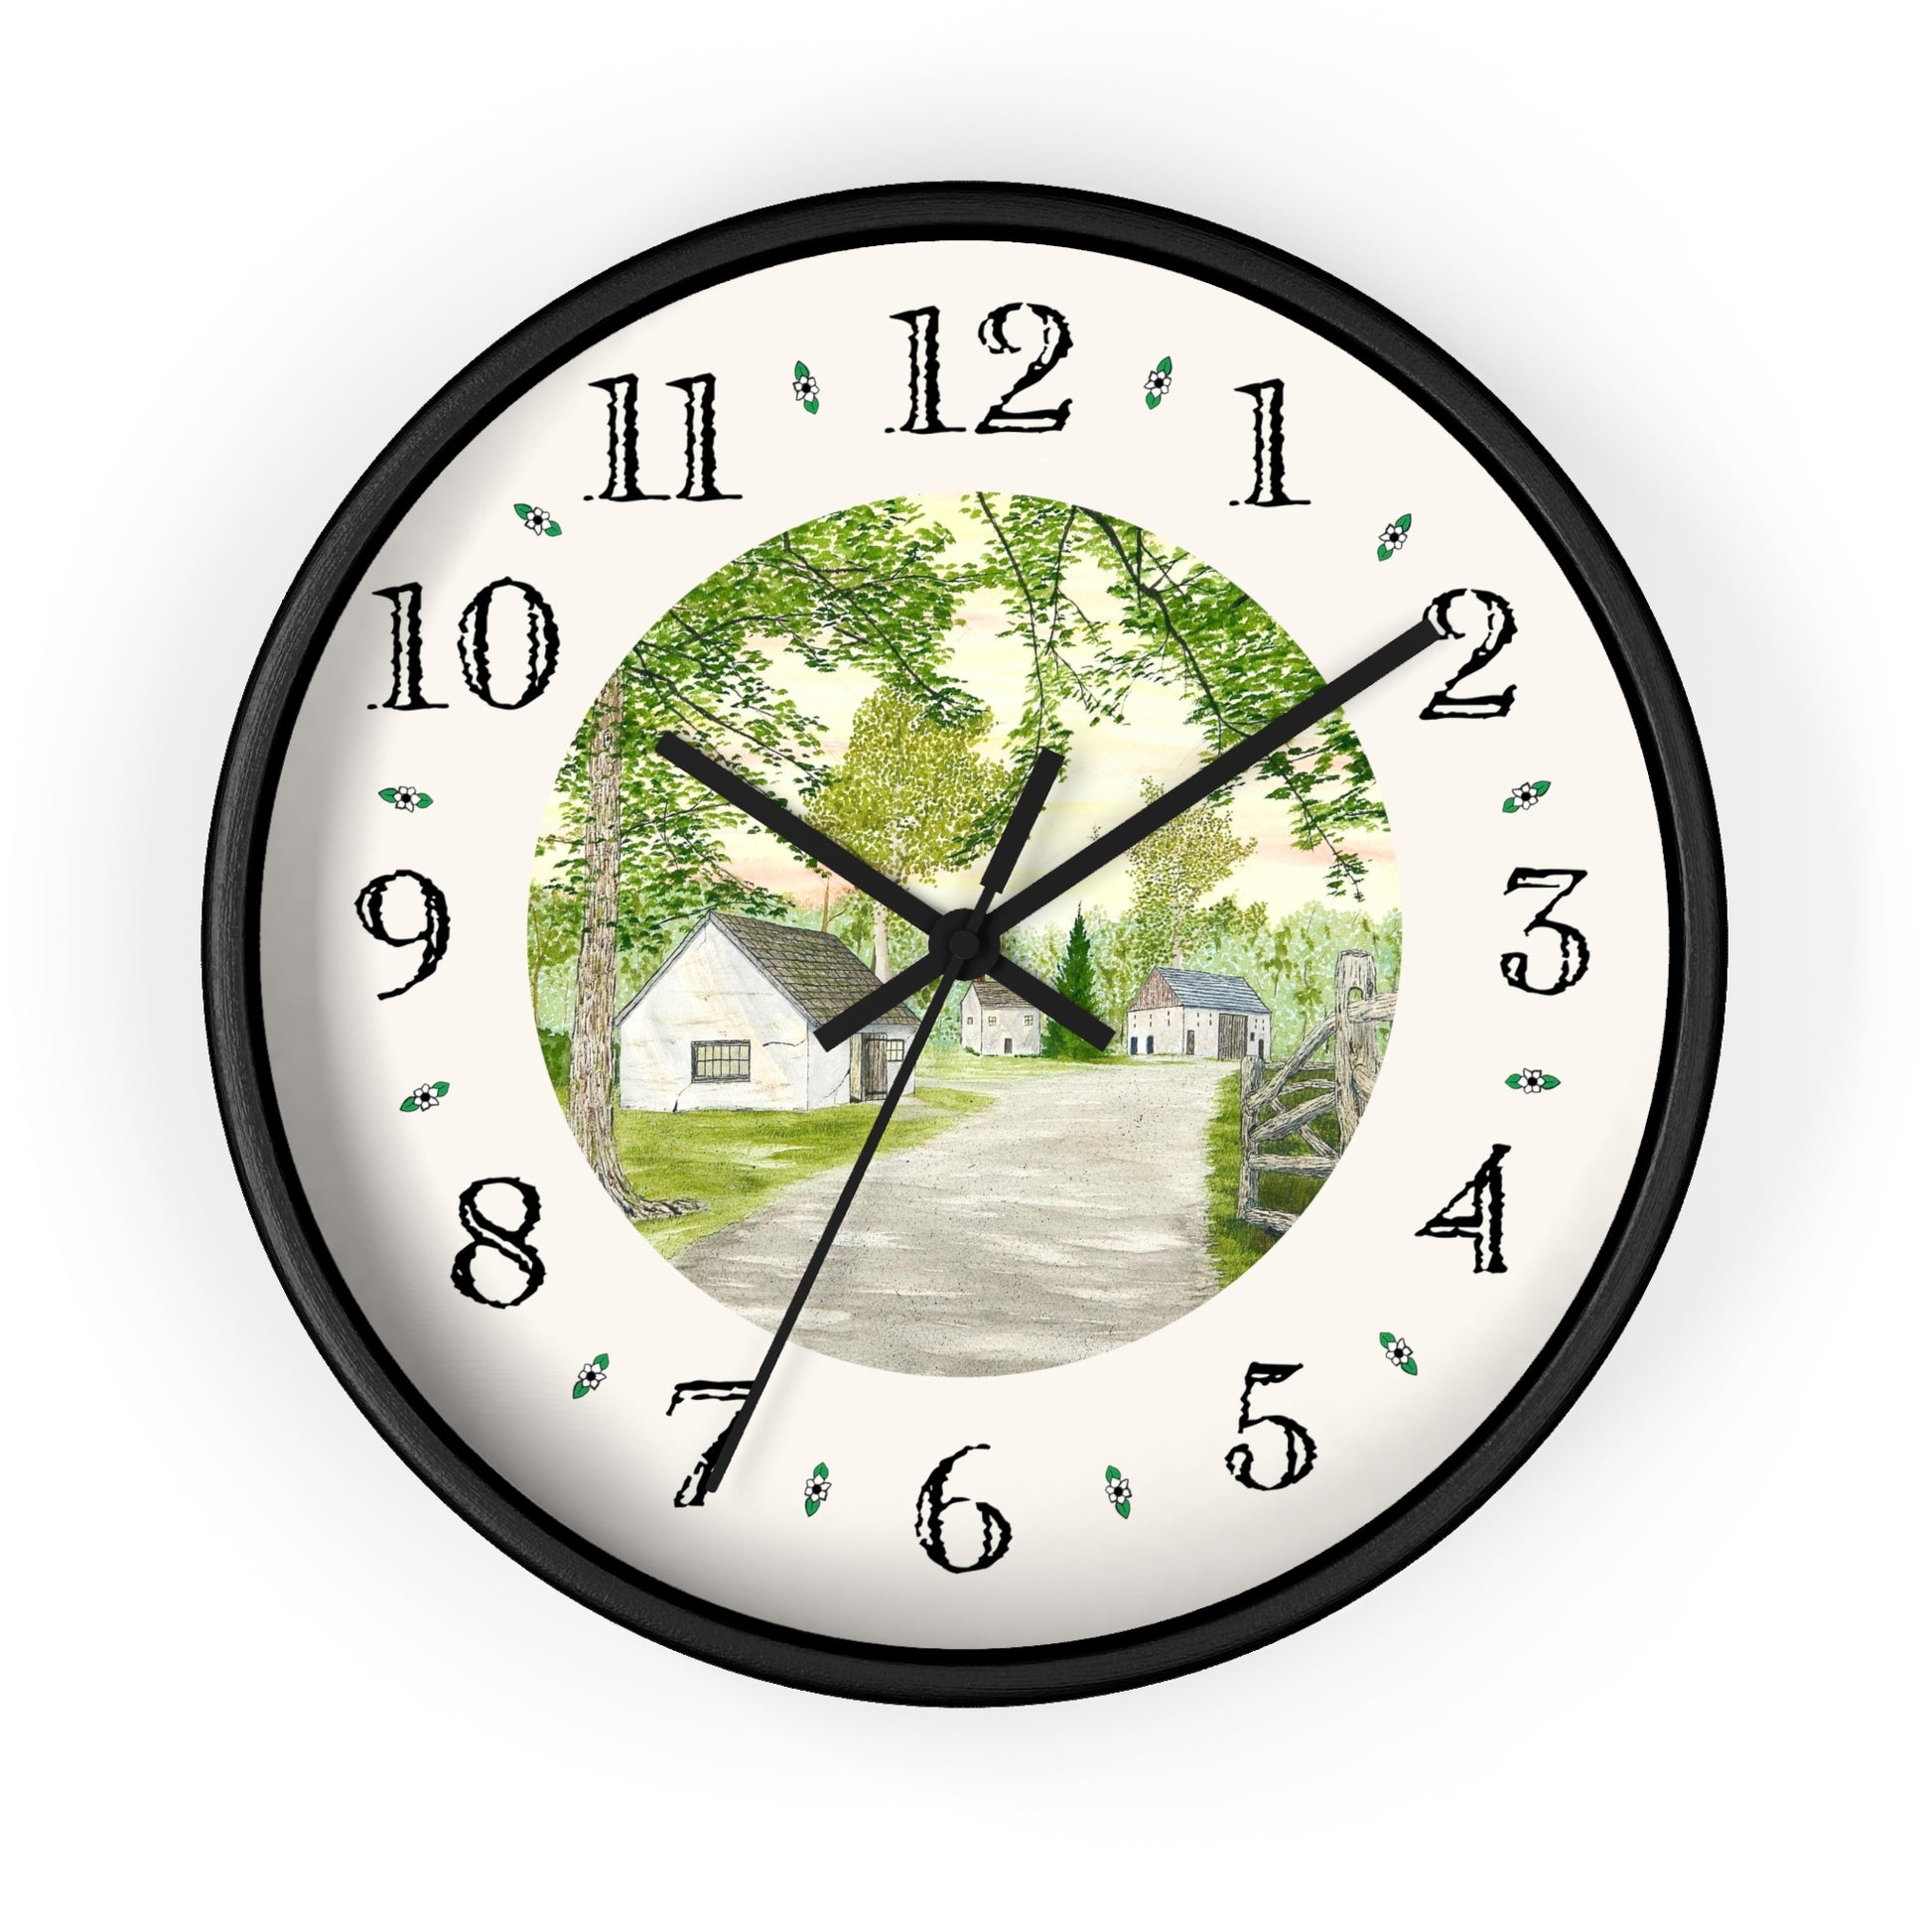 The Country Lane and Fence Heirloom Designer Clock will add a unique touch to any room in your home. The clock features a reproduction of a watercolor painting by artist Lee M. Buchanan and has hand-drawn country designs between the numbers on the clock. 